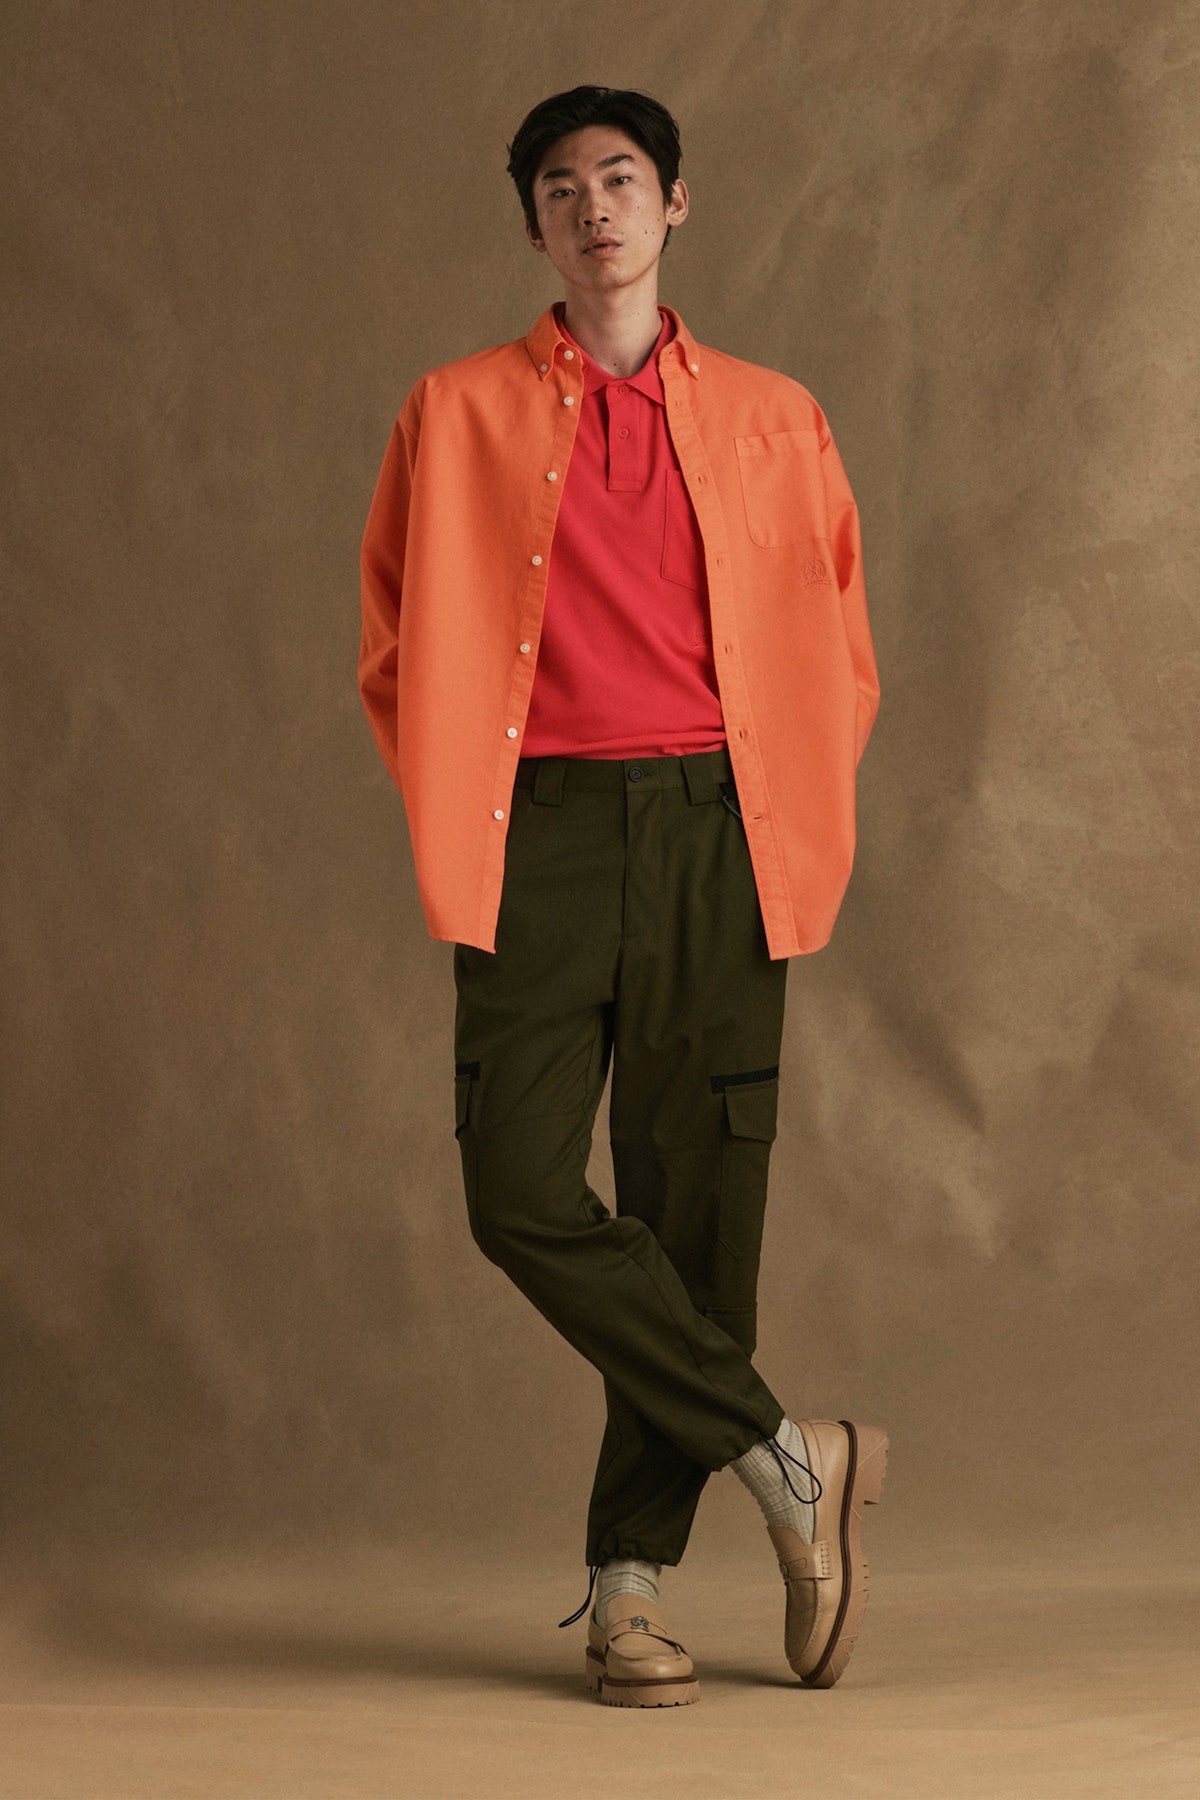 fleksibel suppe Metode Tommy Hilfiger Spring 2022 Menswear Collection – PAUSE Online | Men's  Fashion, Street Style, Fashion News & Streetwear